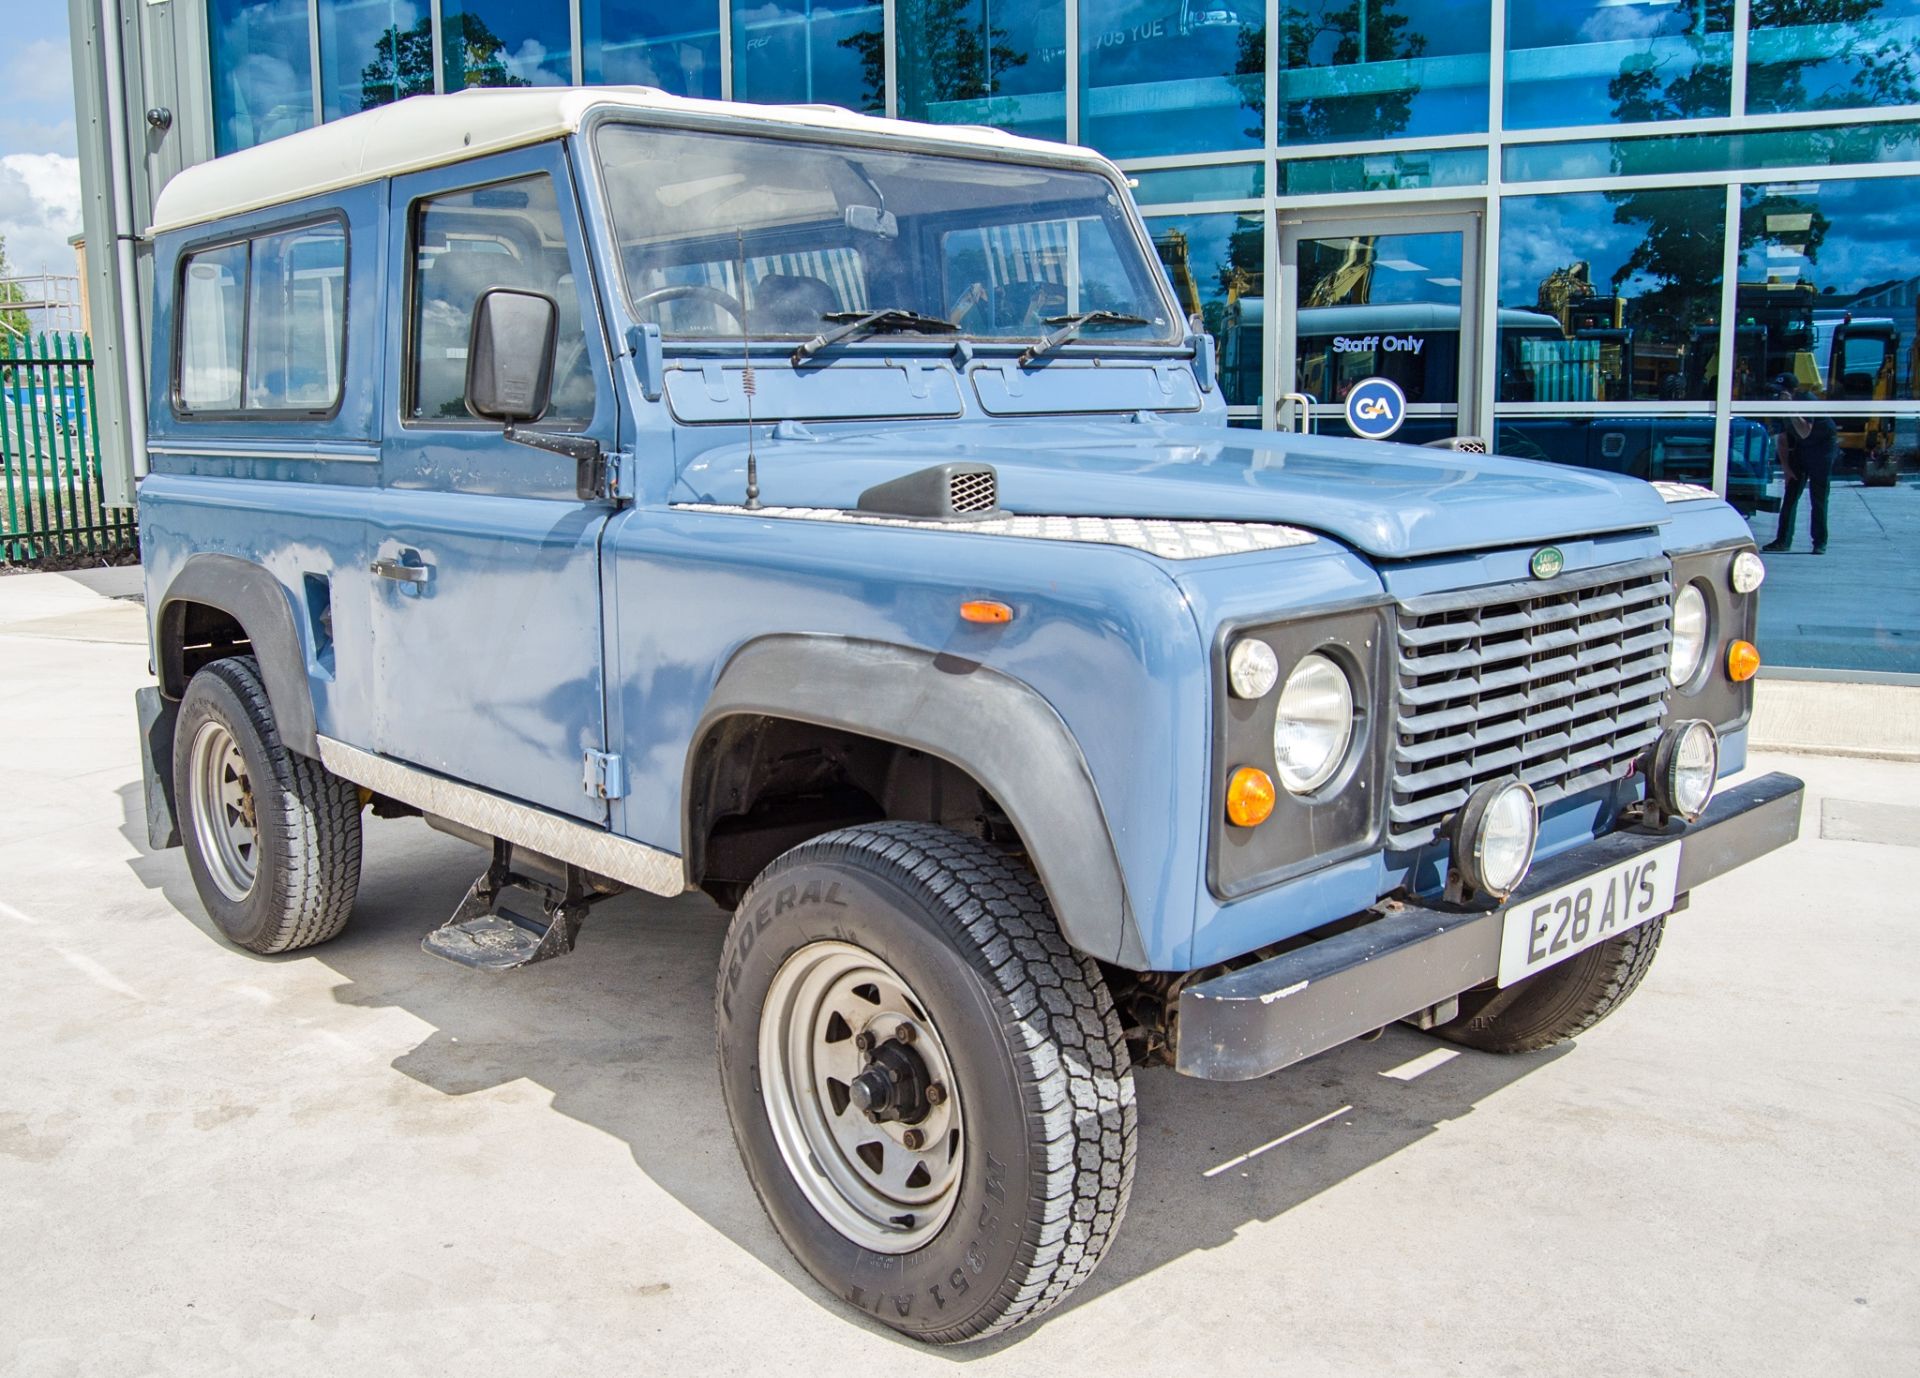 Land Rover 90 2.5 200 Tdi diesel 4wd utility vehicle Registration Number: E28 AYS Date of - Image 2 of 42